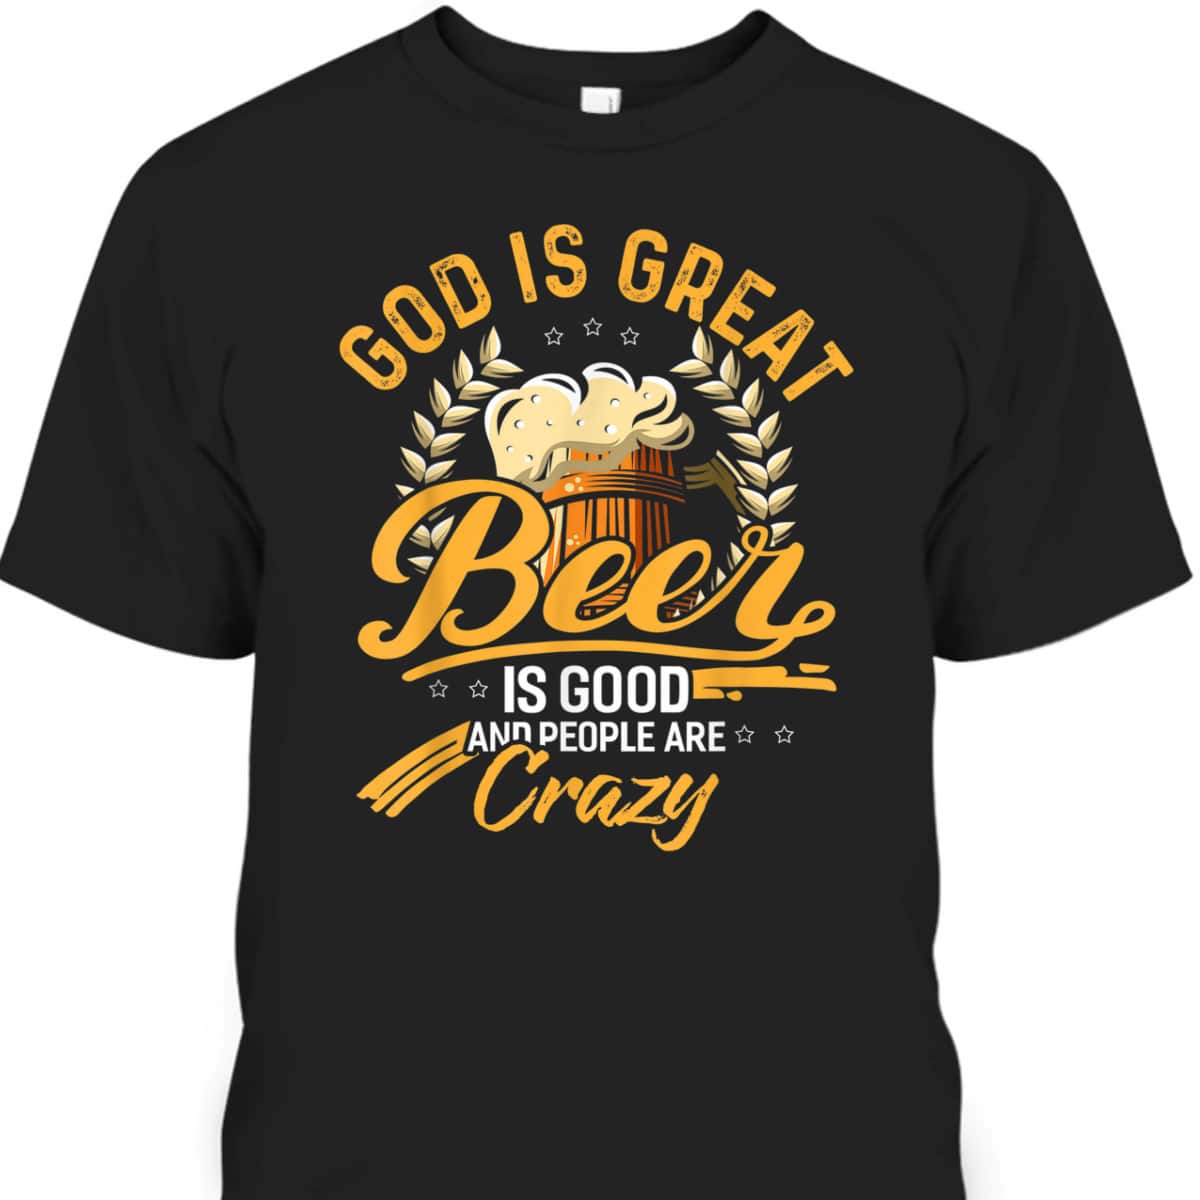 God Is Great Beer Is Good And People Are Crazy T-Shirt